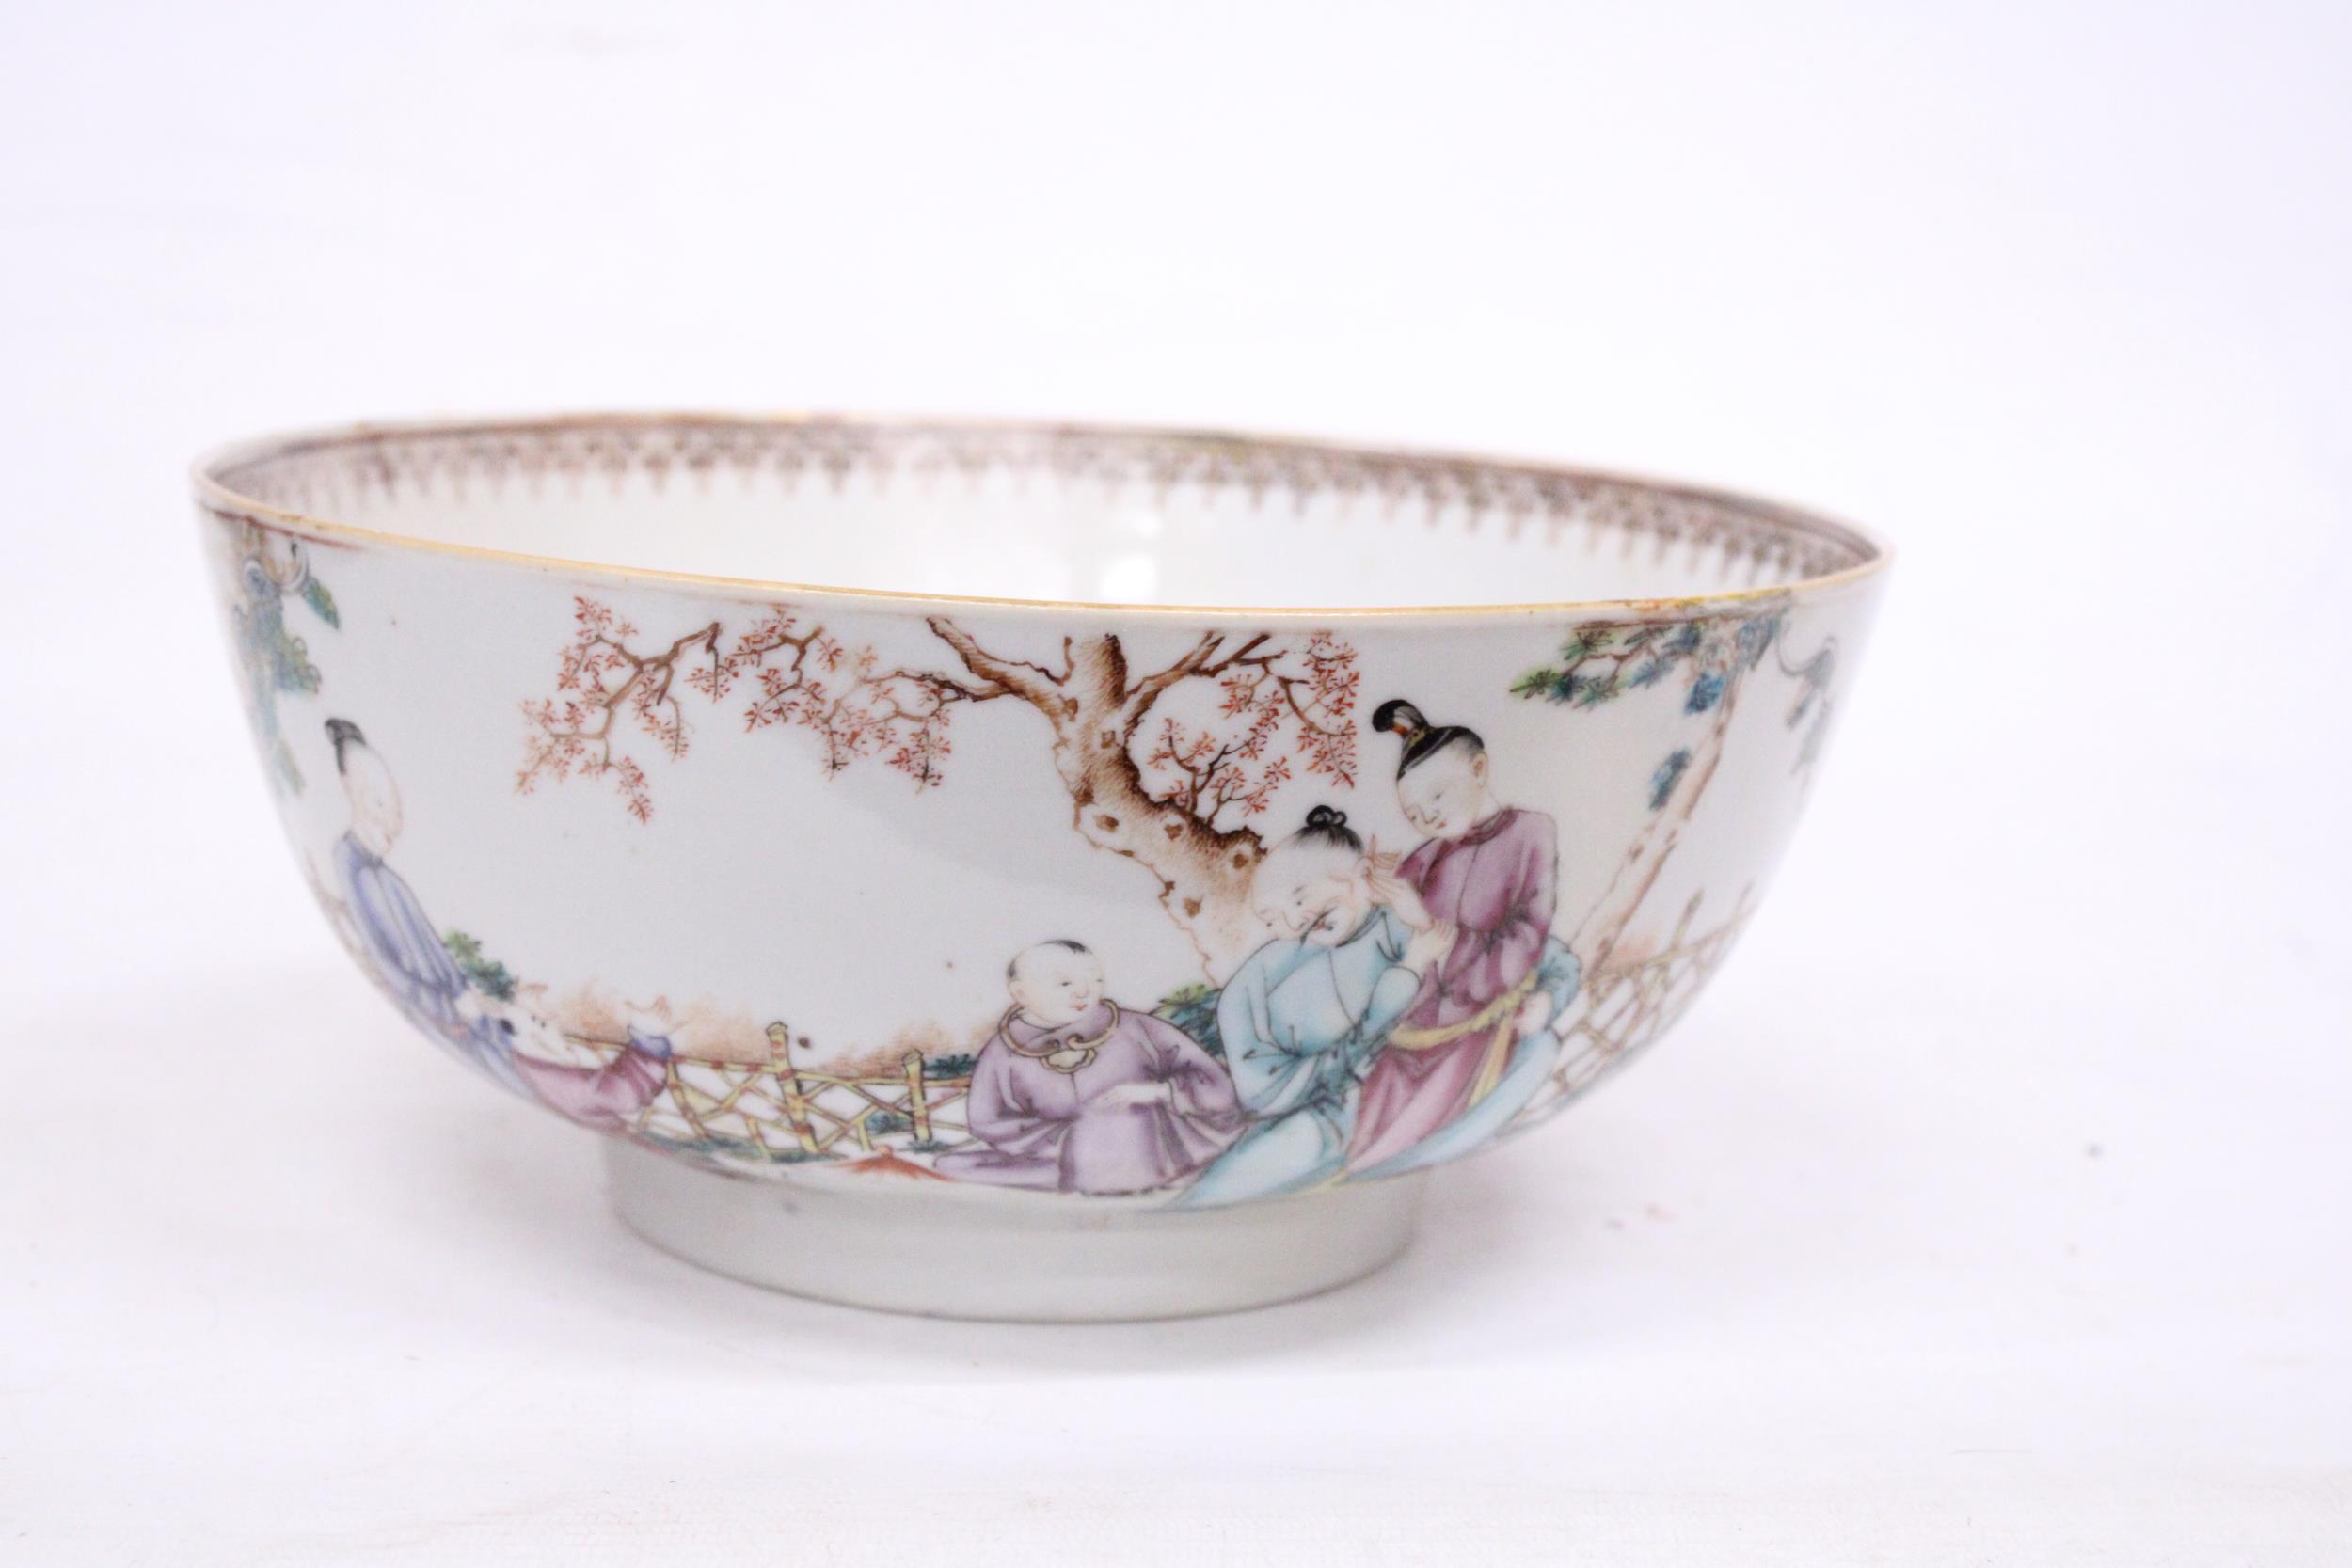 A CHINESE EXPORT FIGURAL DESIGN FOOTED BOWL - 11 CM (H) - 25.5 (D) - Image 3 of 7